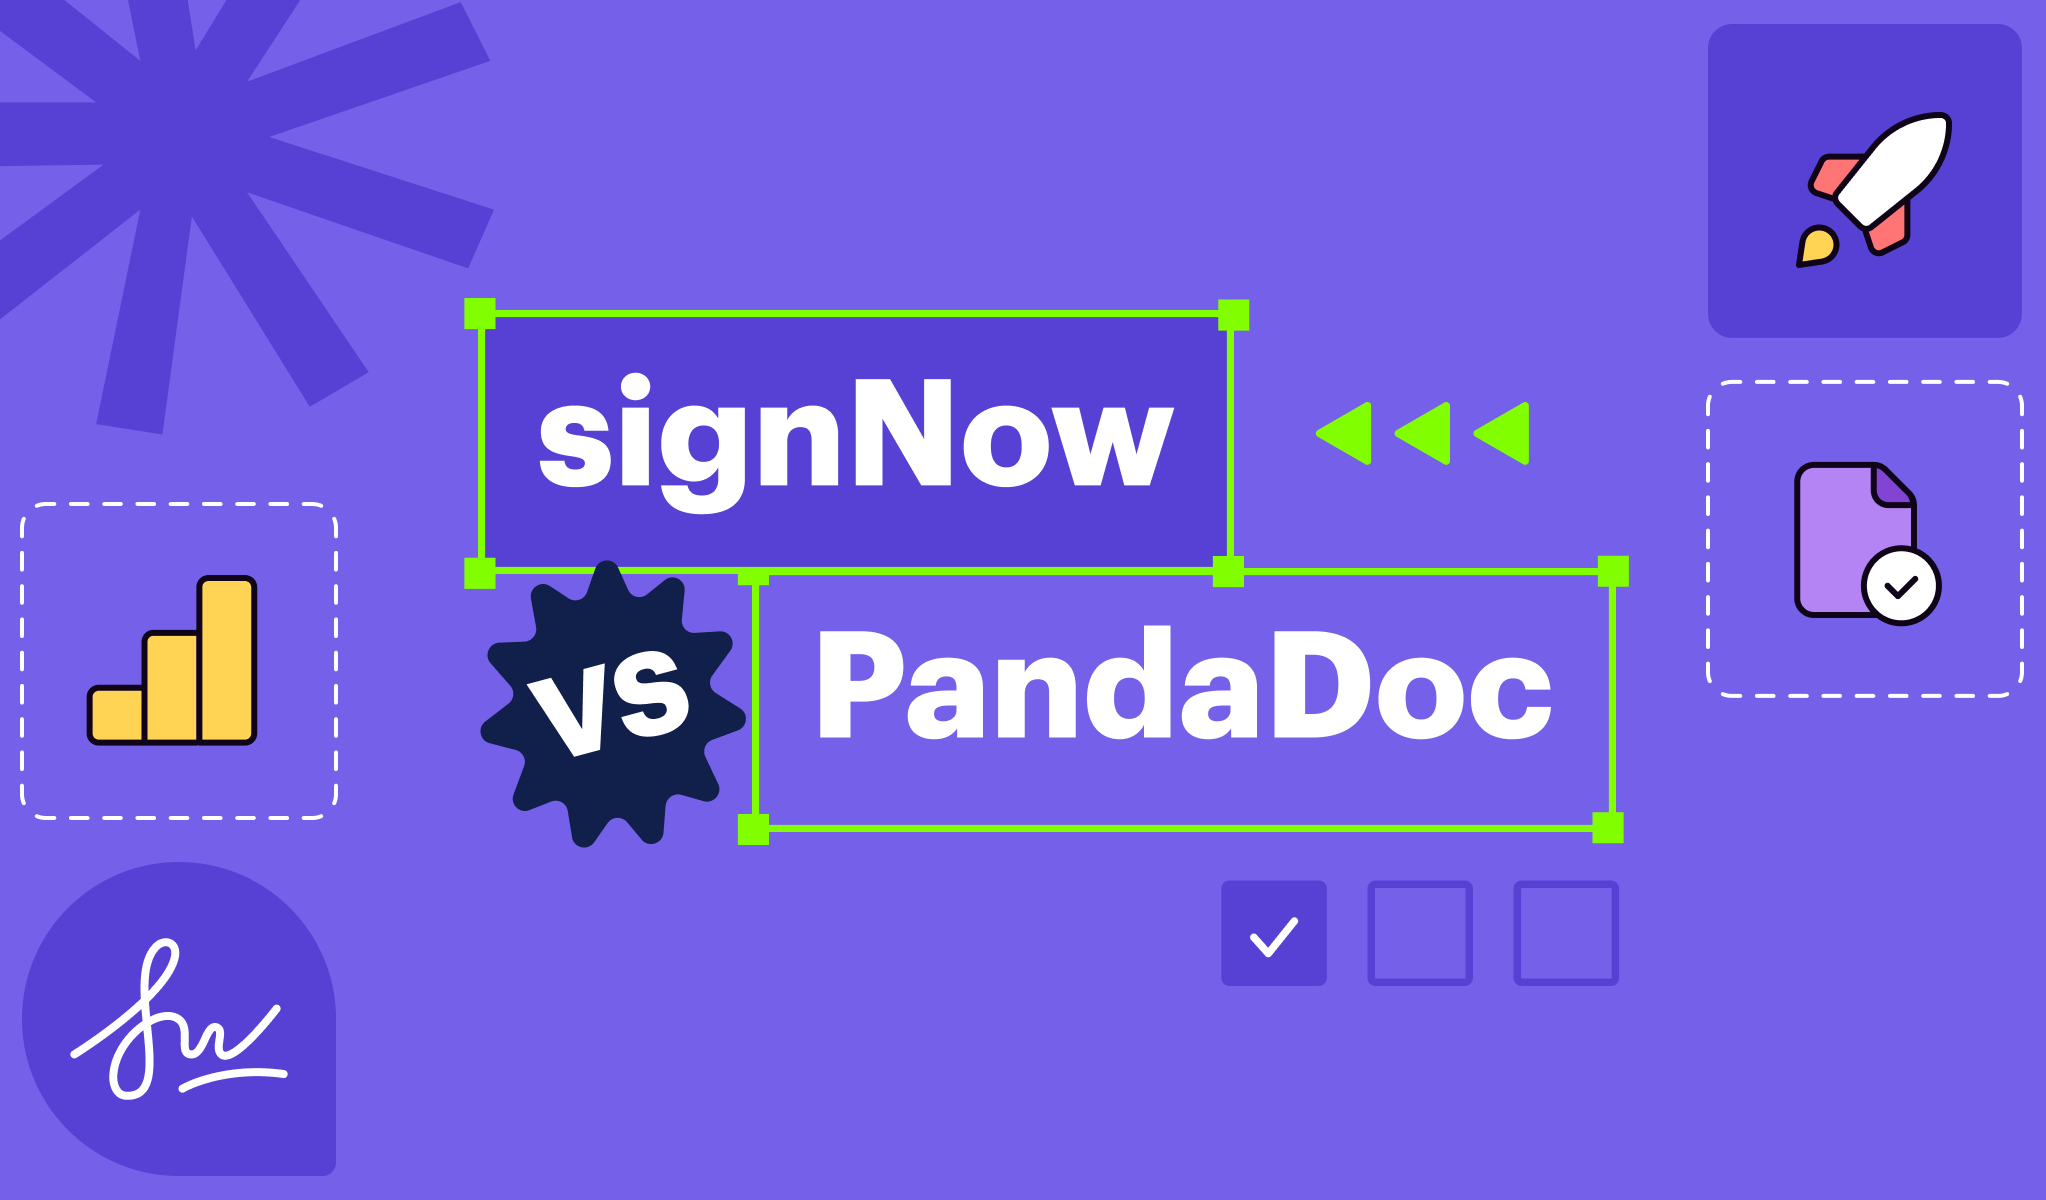 signNow vs PandaDoc - featured image